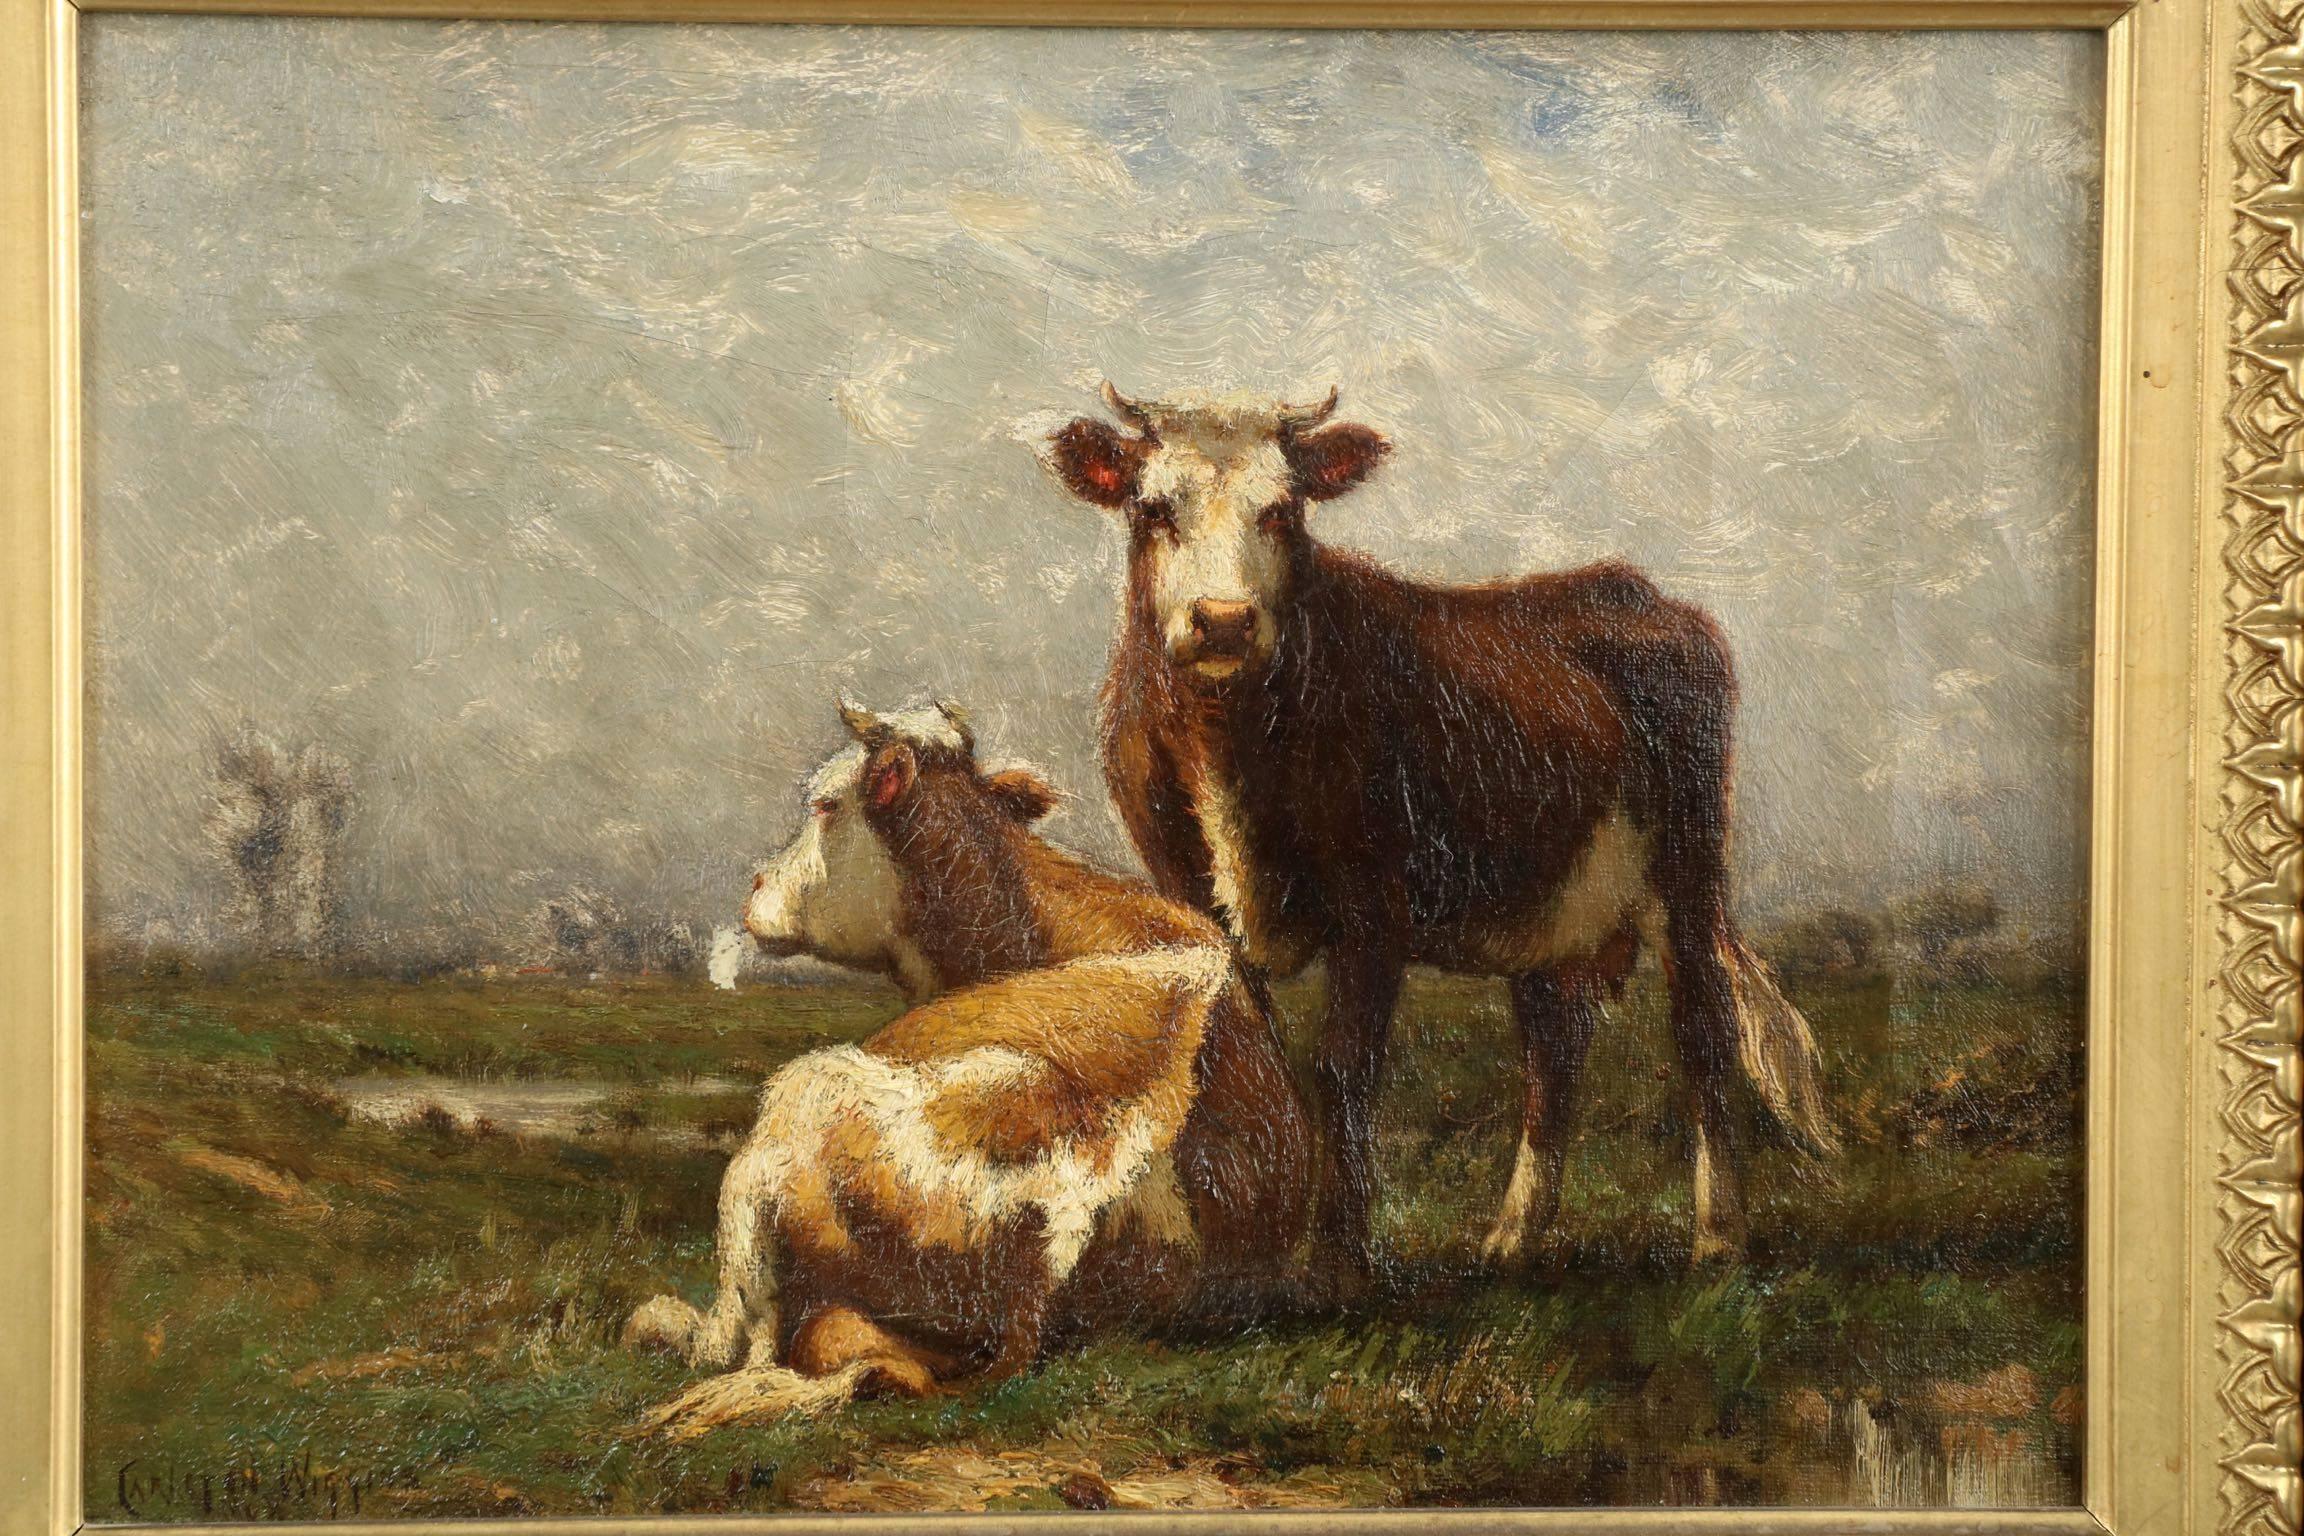 A fine and vibrant painting of two cows, the work has a very heavy atmosphere distinctly influenced by the Dutch and French Barbizon School. The surface is painted almost feverishly, the heavy impasto literally raising dimension to bring the subject